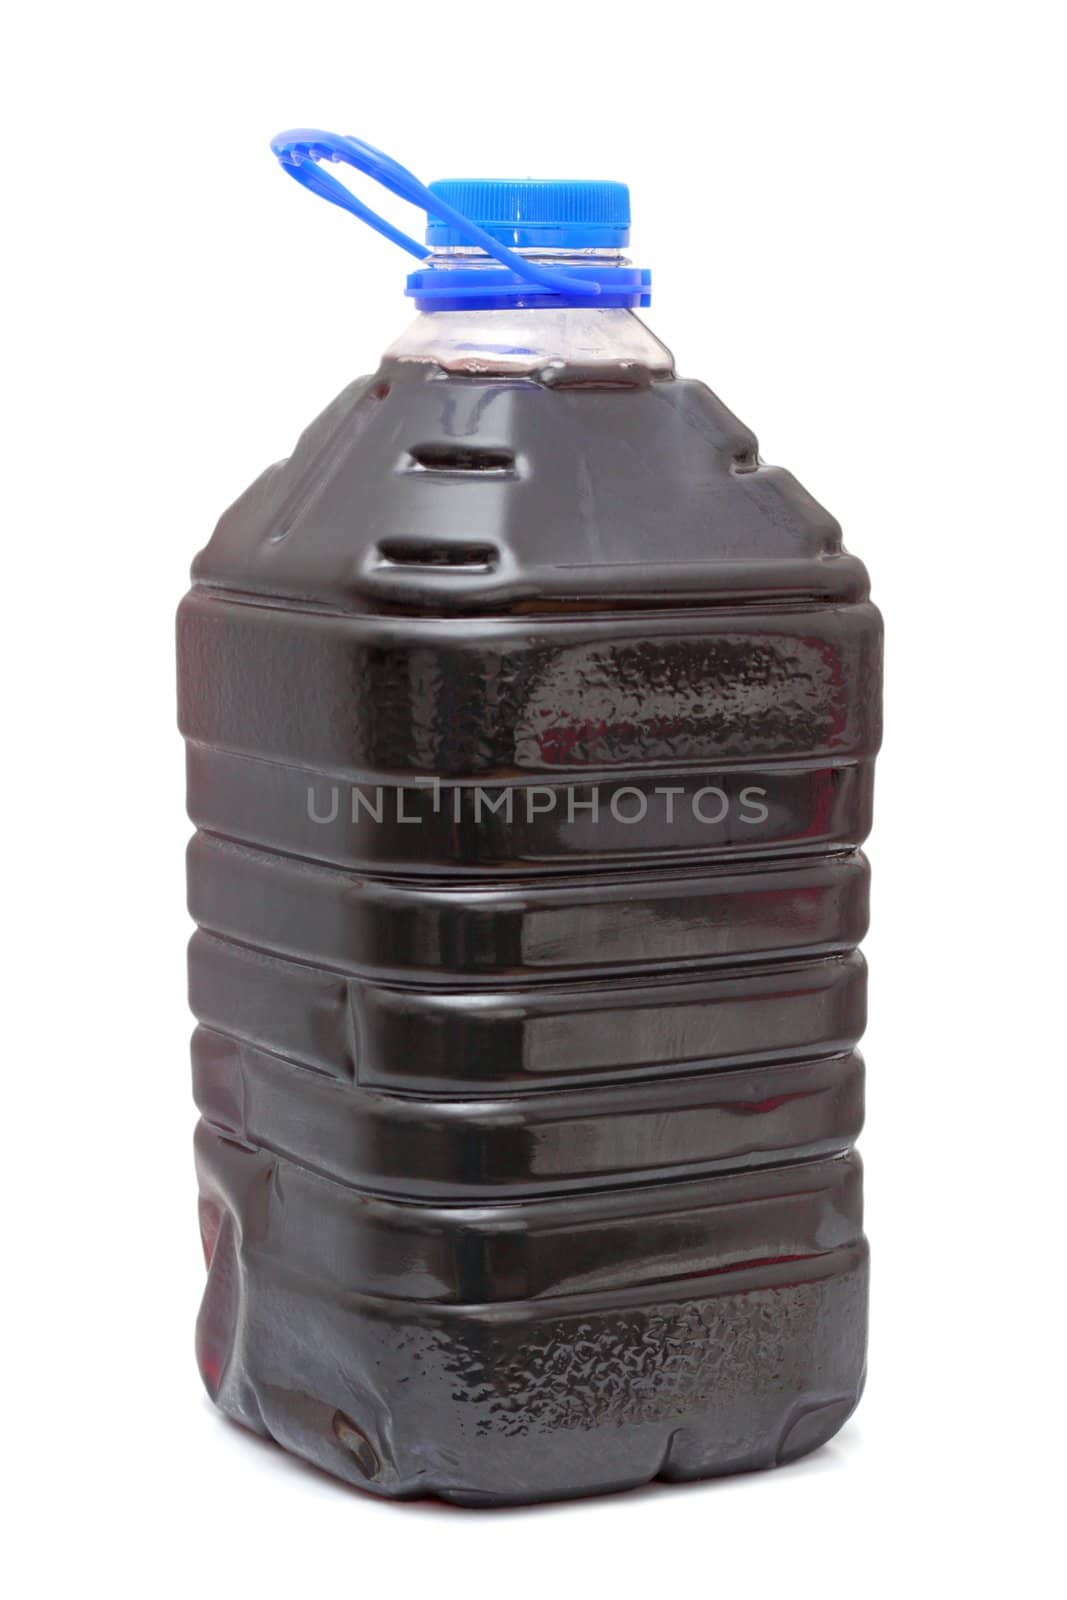 homemade red wine in plastic container with blue cap over white background